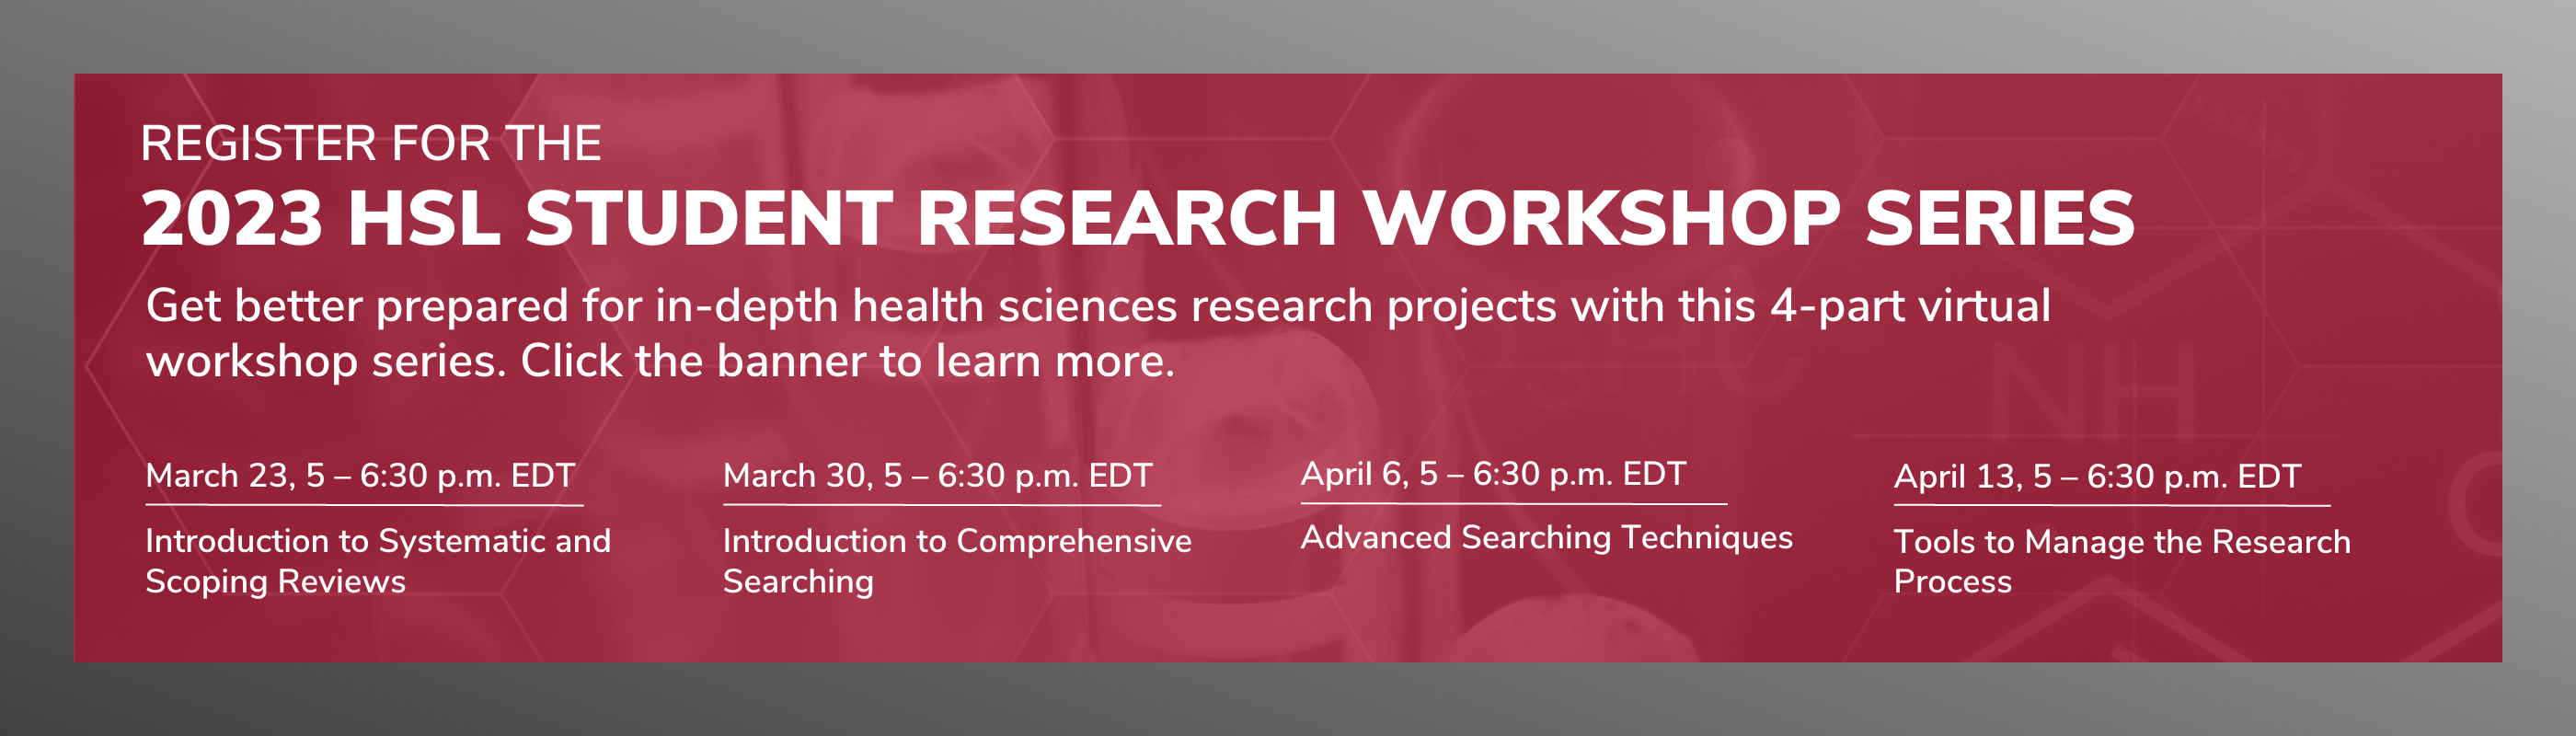 Click on the banner to learn more about the 2023 Student Research Workshop Series.